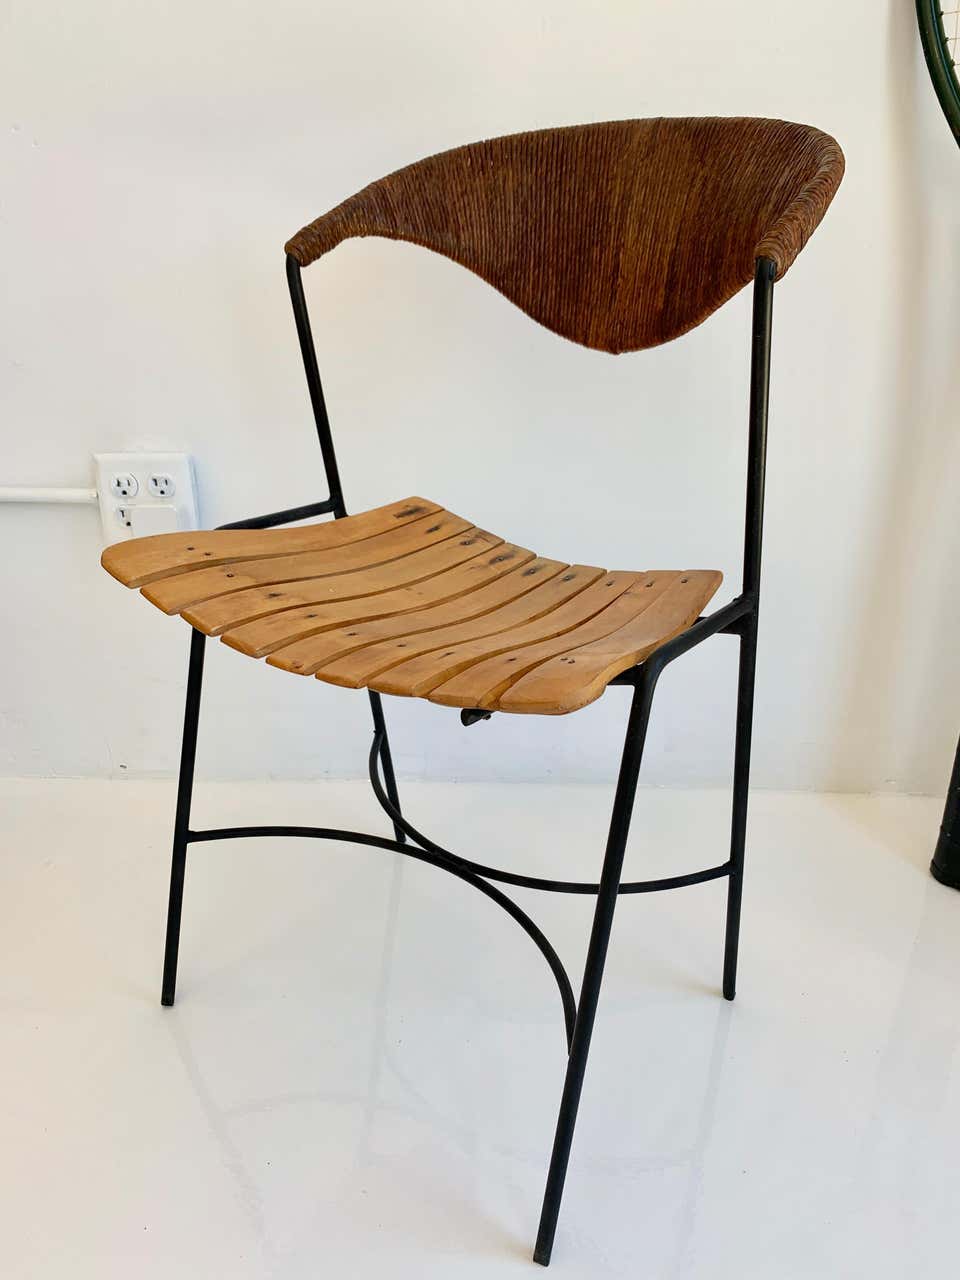 Arthur Umanoff Wood and Rush Sculptural Chairs